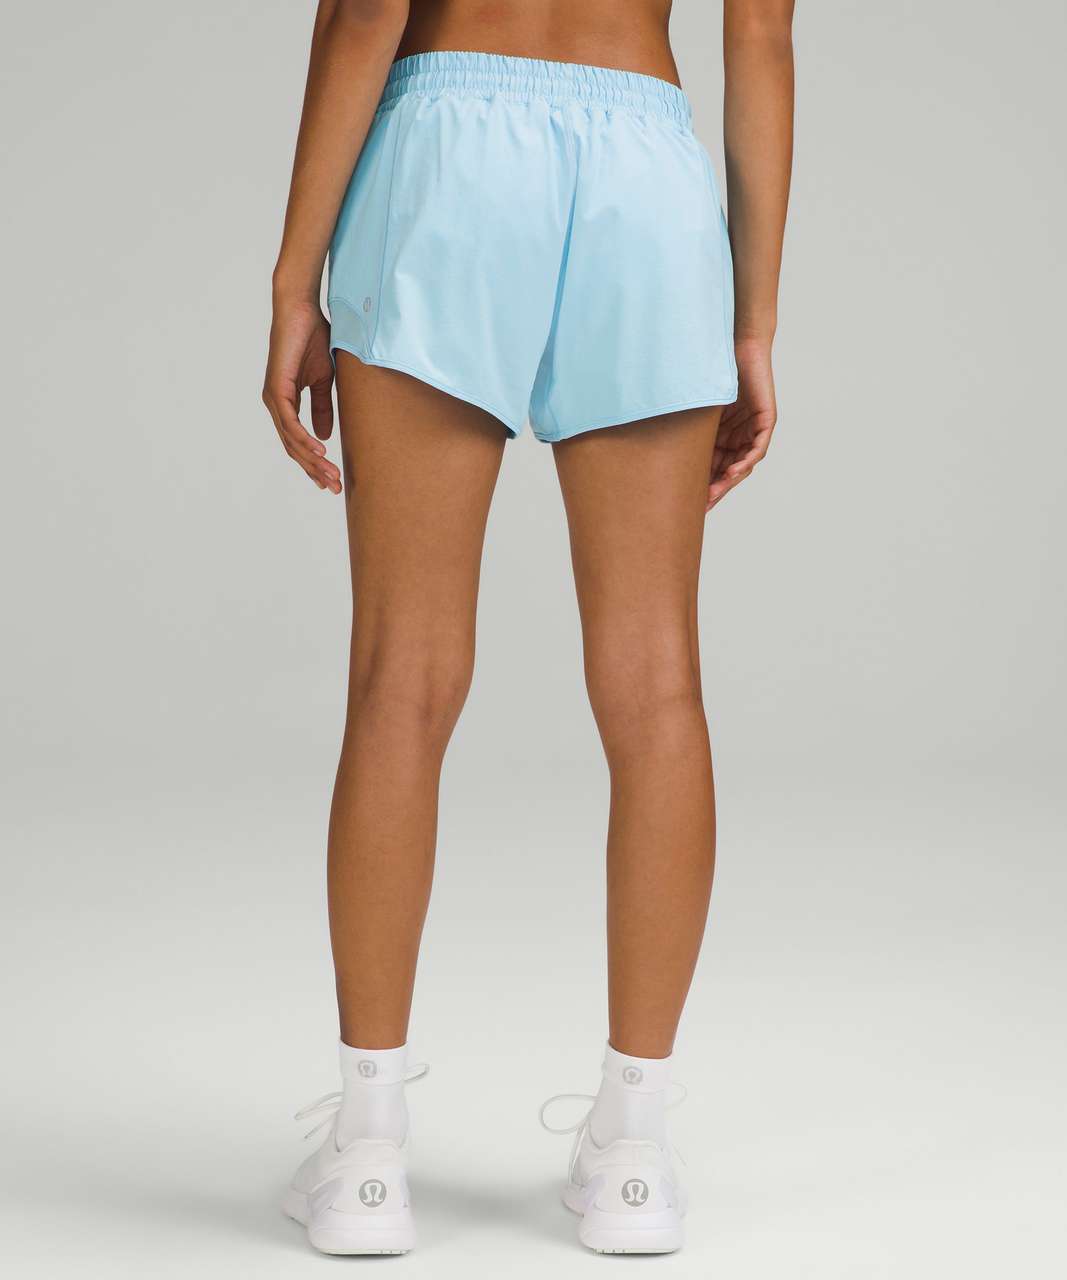 Lululemon Hotty Hot Low-Rise Lined Short 4" - Blue Chill